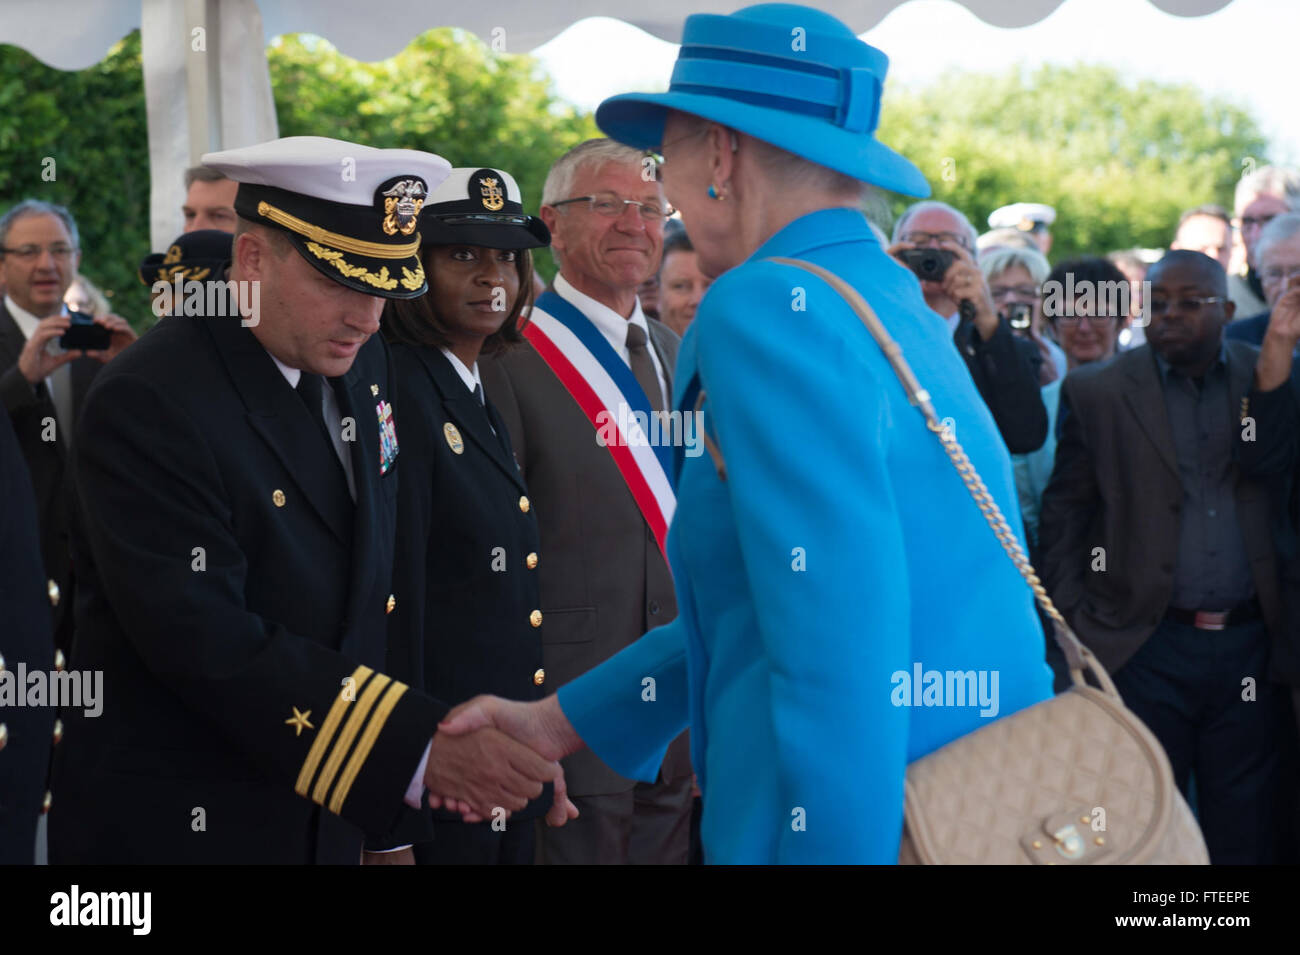 140606-N-YO152-052 UTAH BEACH, France (June 6, 2014) - HM Margrethe II of Denmark greets Cmdr. Brian Diebold, commanding officer of USS Oscar Austin (DDG 79), at a wreath laying ceremony just off the coast of Utah Beach. The event was one of several commemorations of the 70th Anniversary of D-Day operations conducted by Allied forces World War II June 5-6, 1944. Over 650 U.S. military personnel have joined troops from several NATO nations to participate in ceremonies to honor the events at the invitation of the French government. (U.S. Navy photo by Mass Communication Specialist 3rd Class (SW) Stock Photo